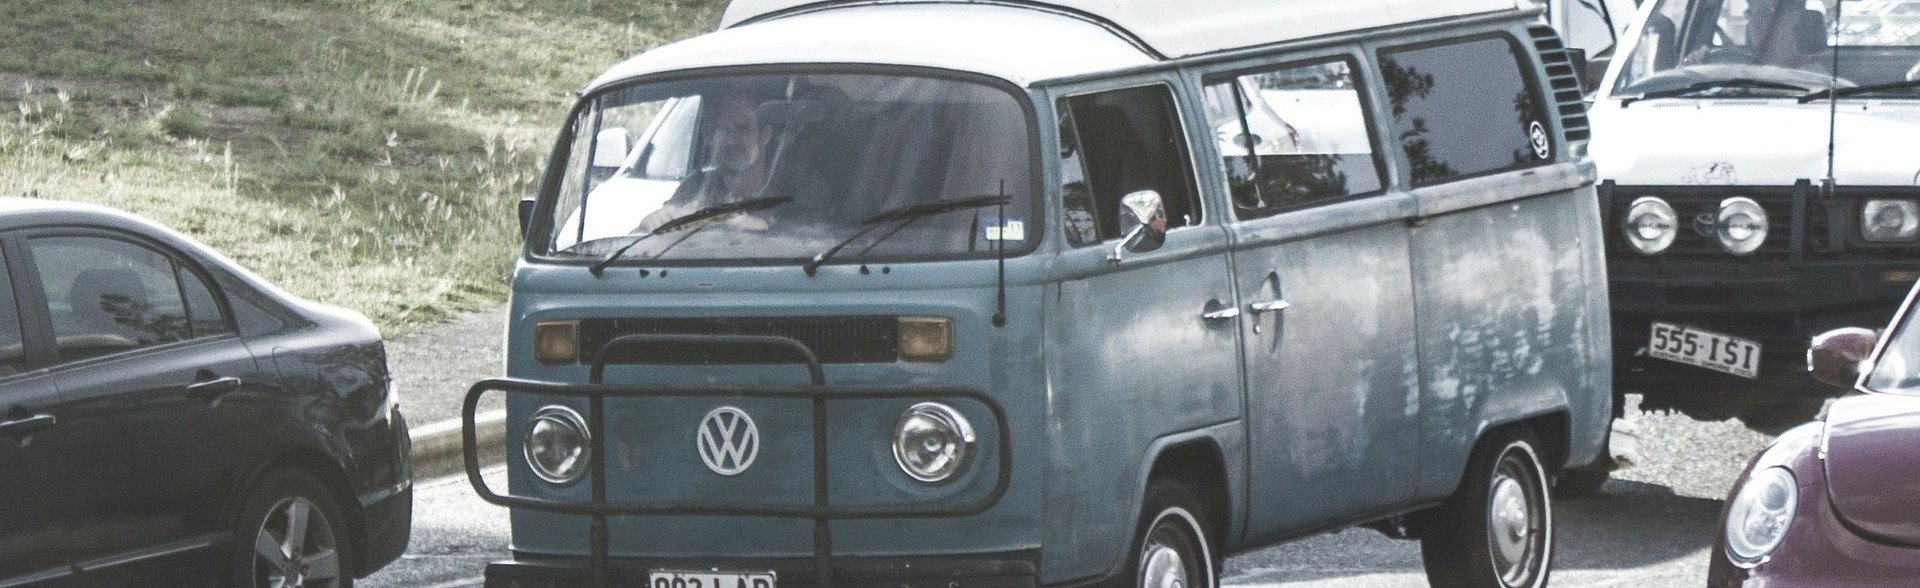 Campervan on the Road | Breast Cancer Car Donations